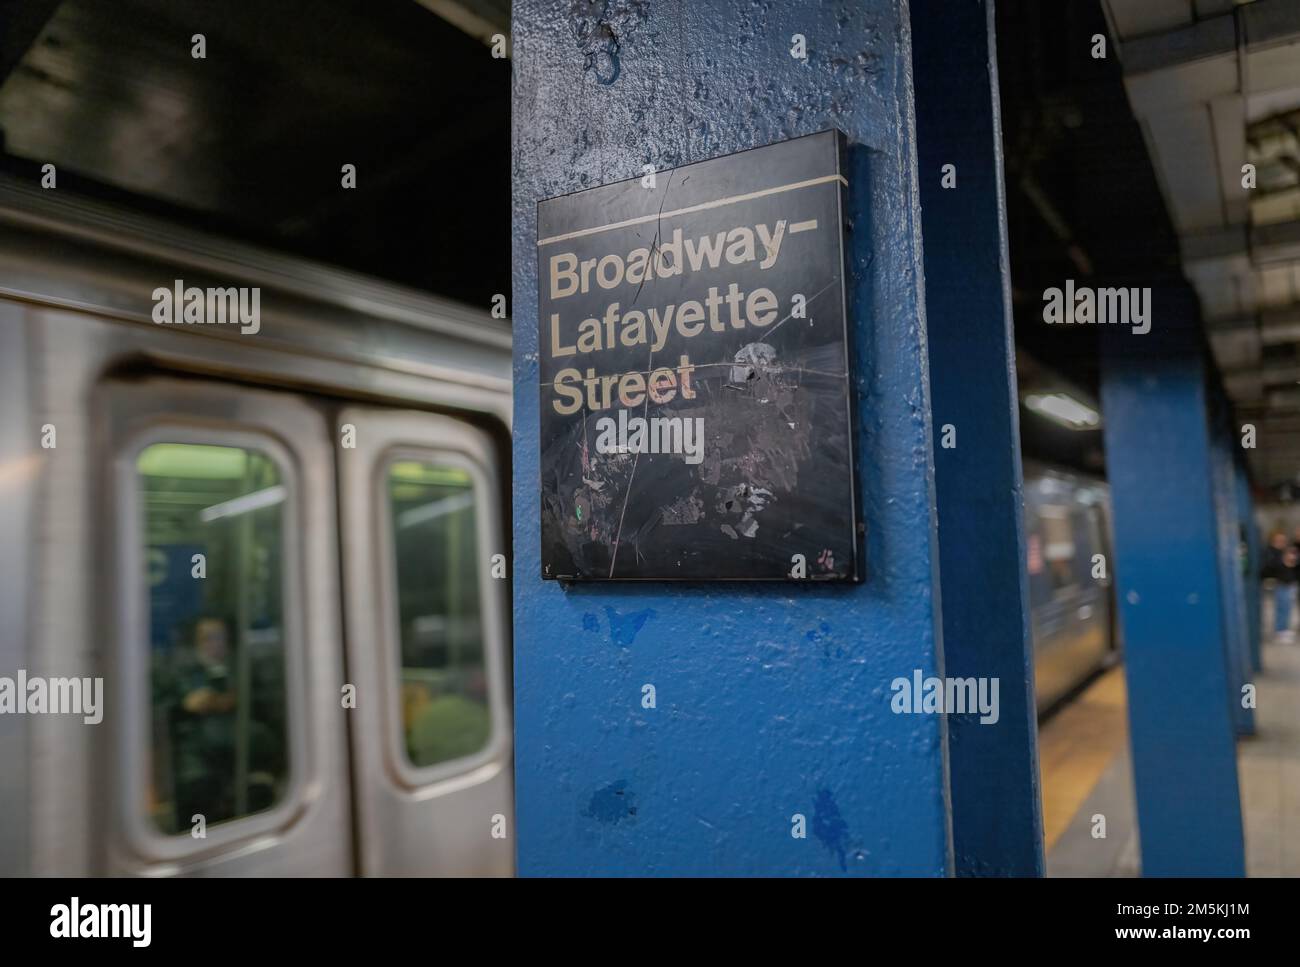 NEW YORK, N.Y. – December 28, 2022: A Broadway-Lafayette Street platform is seen in the New York City Subway. Stock Photo